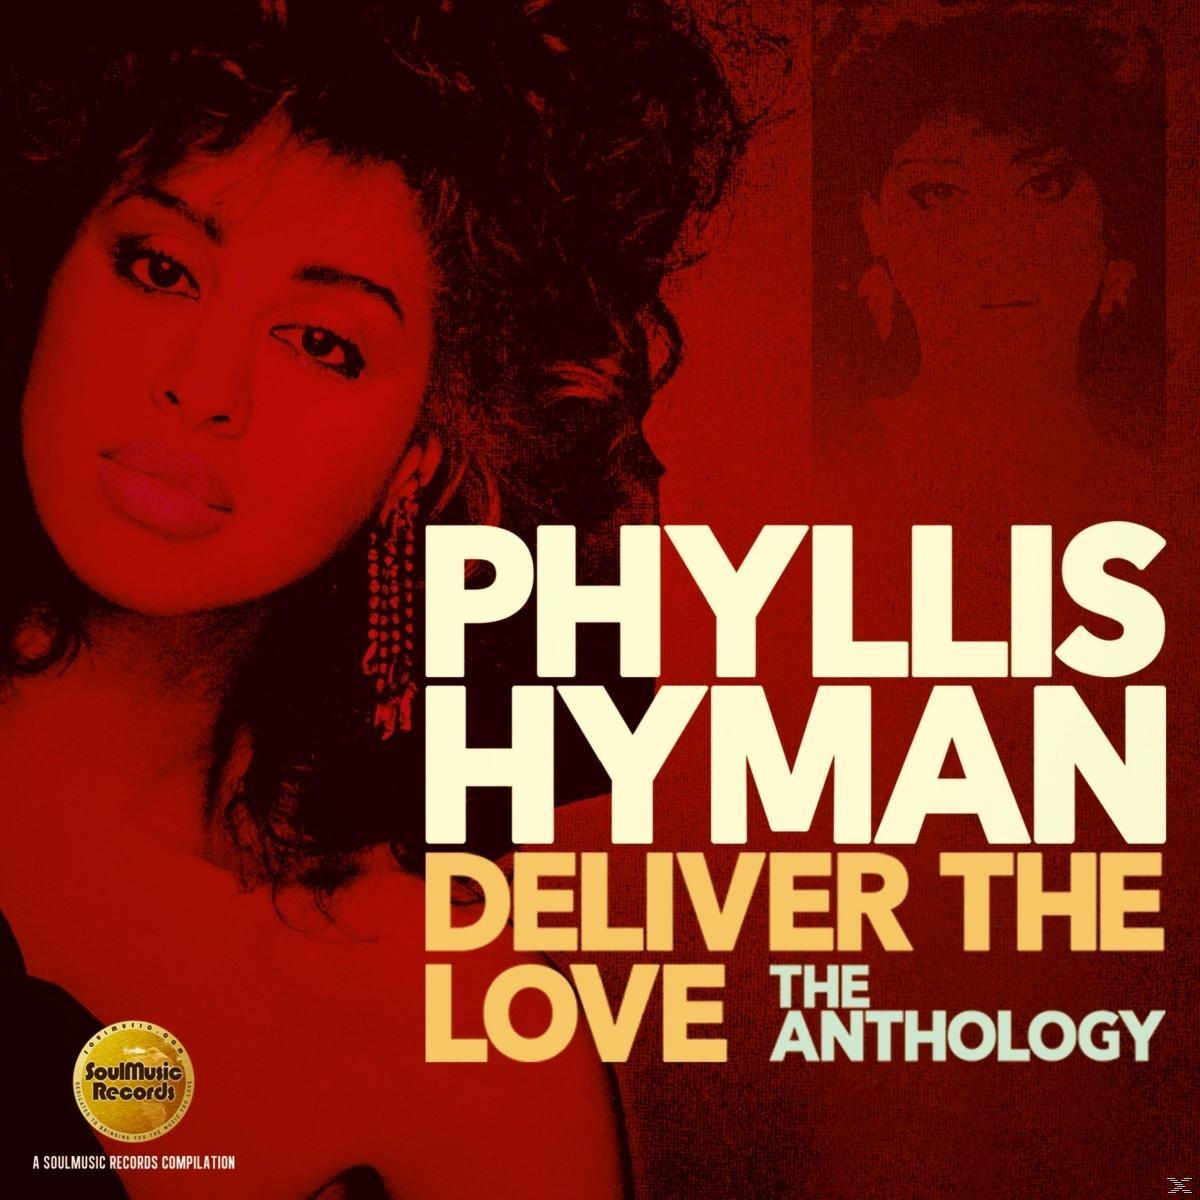 Phyllis Hyman The Love-The Anthology - - Deliver (CD)